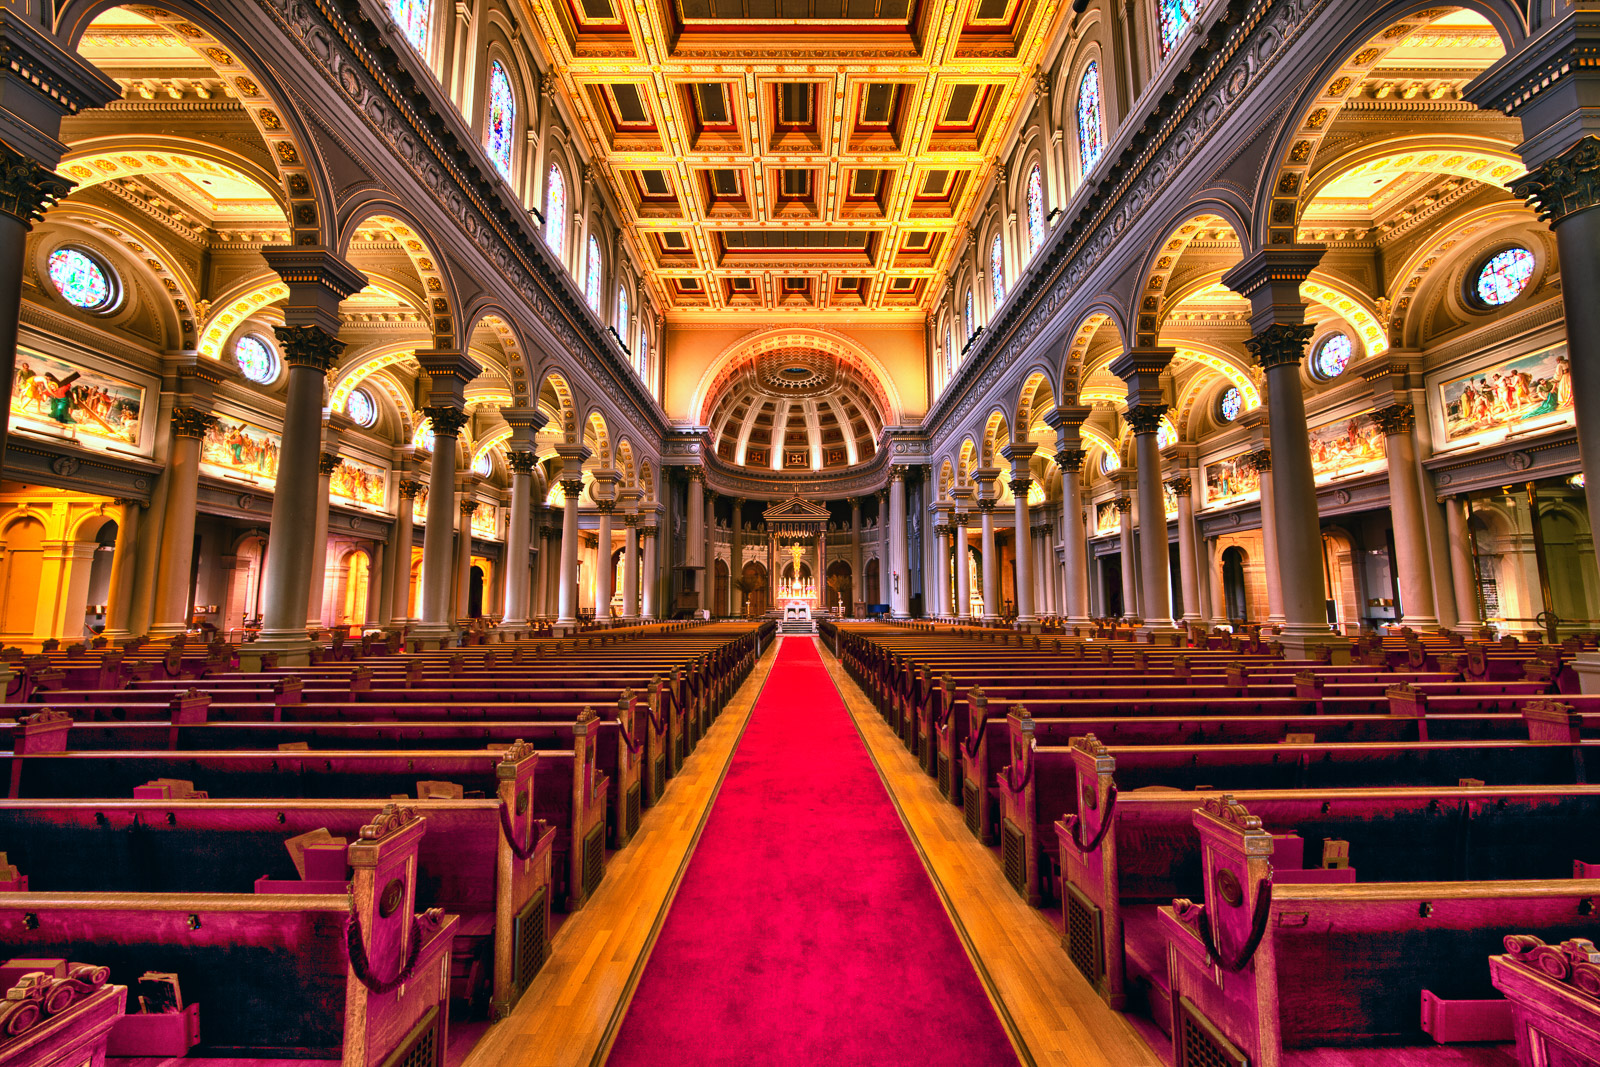 HDR rendition of the interior of St. Ignatius Church in San Francisco